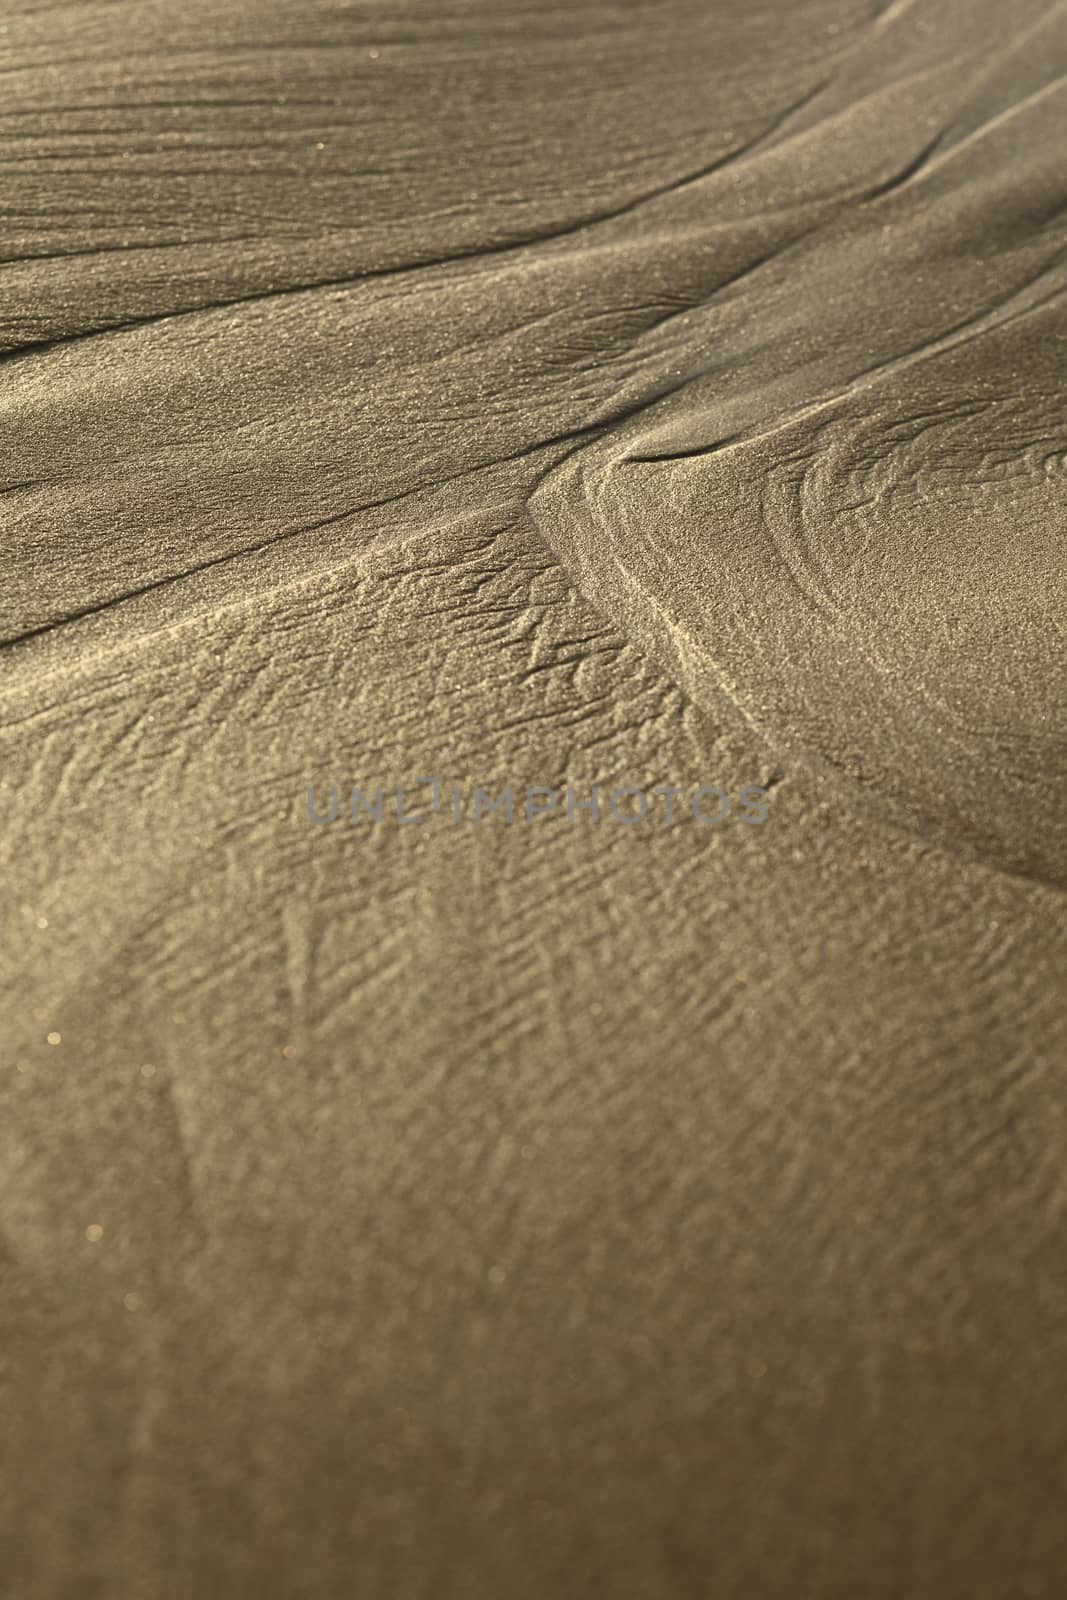 Lines Formed by the Water on Sandy Beach by sven